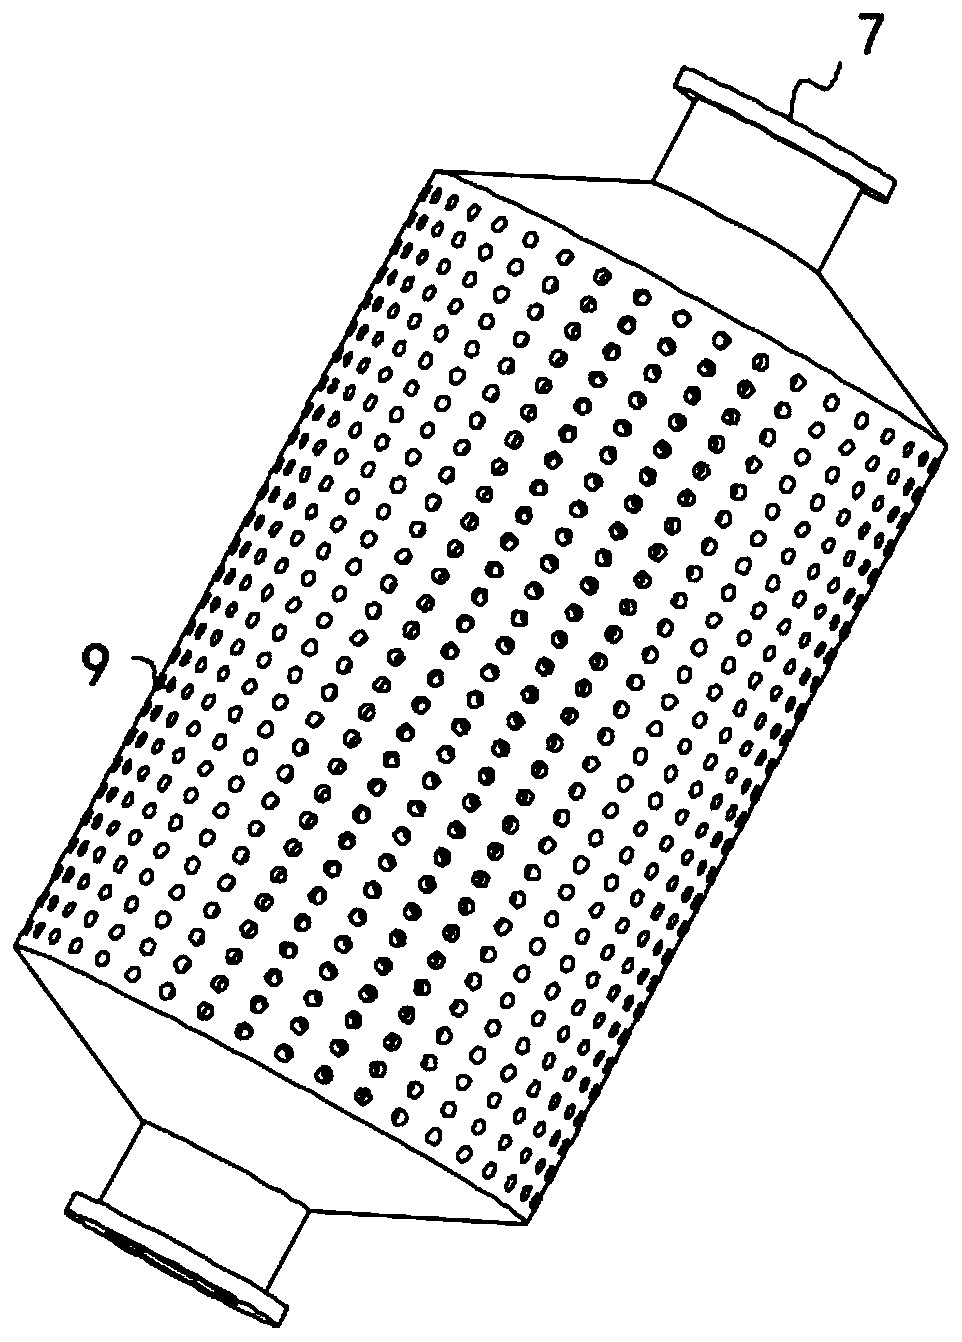 Particle-containing smoke dust filtering device